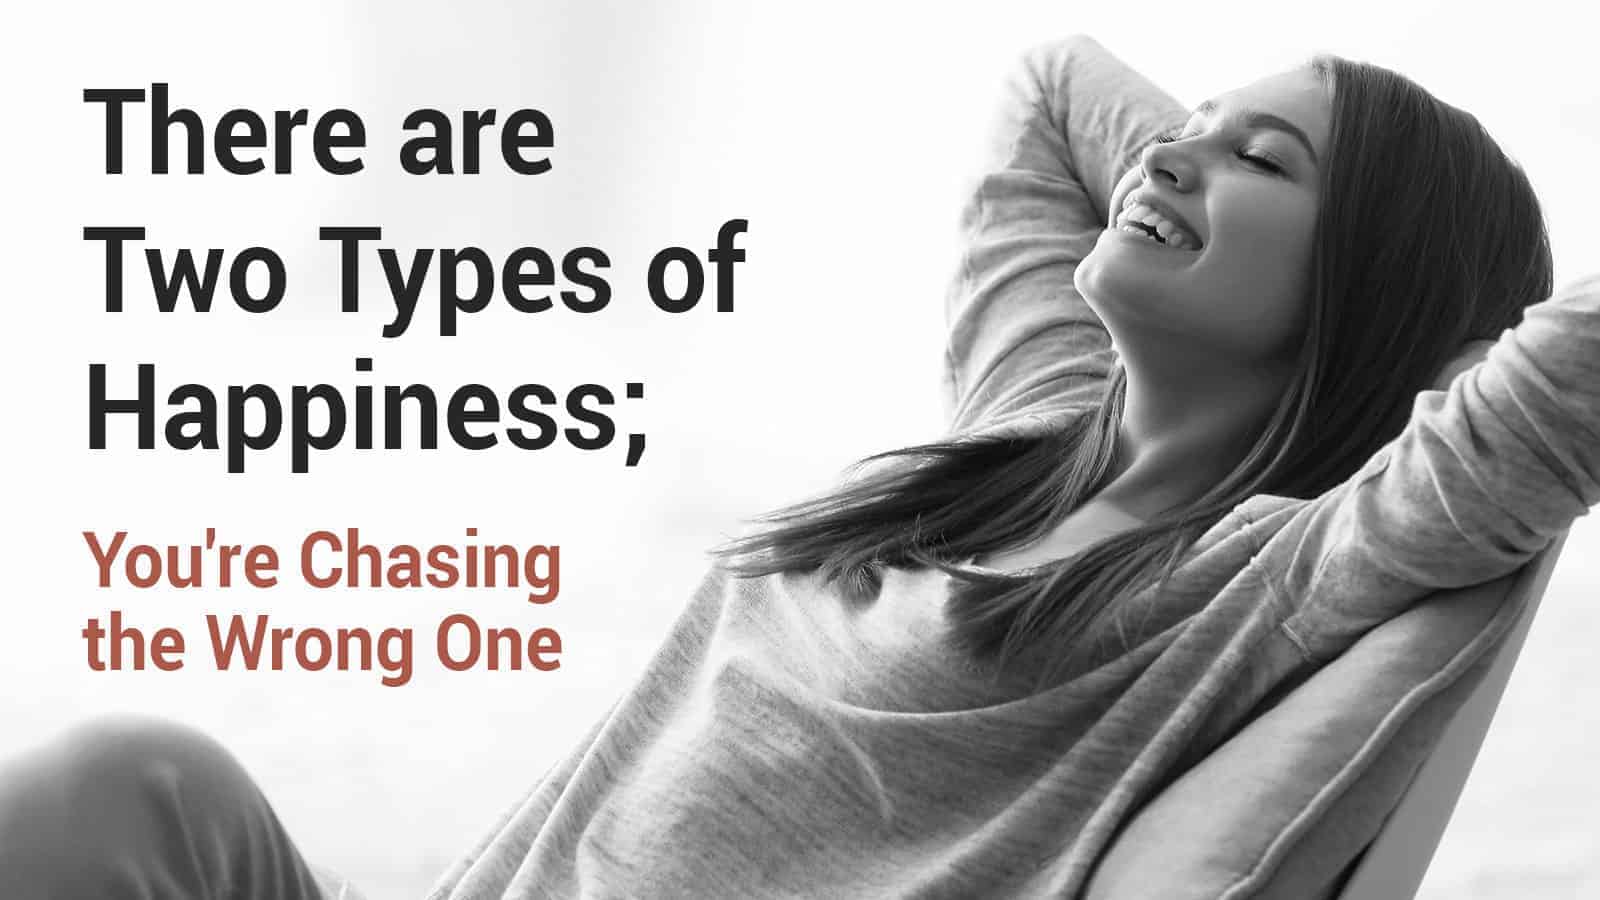 There are Two Types of Happiness; You’re Chasing the Wrong One